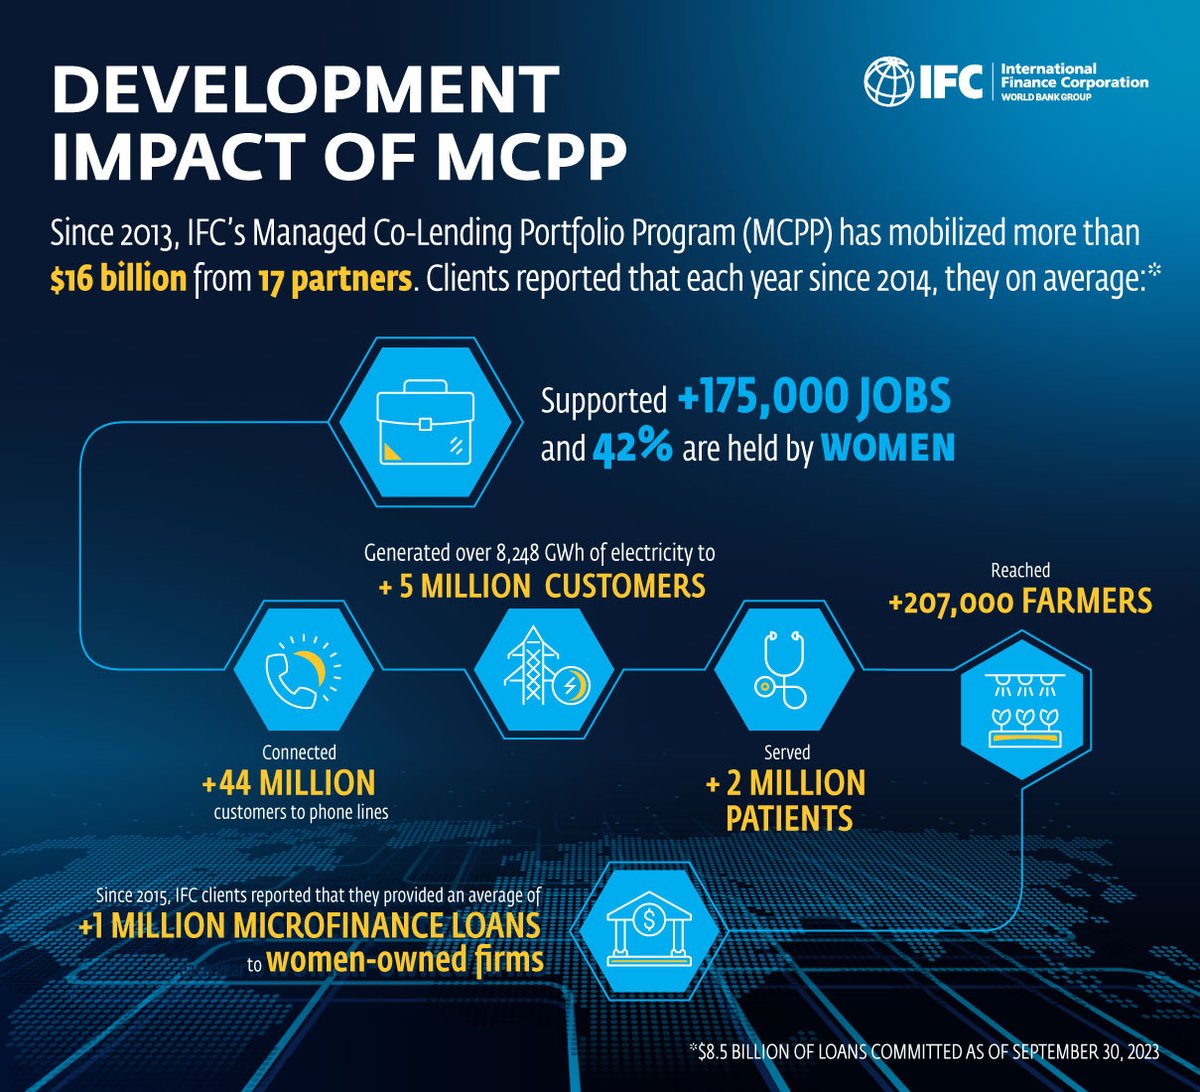 Developing countries face an estimated $4 trillion investment gap per year to achieve the #SDGs. 

Find out how an innovative solution by IFC is helping to raise more #privatecapital to address global development challenges. wrld.bg/TK3g50QhuJN